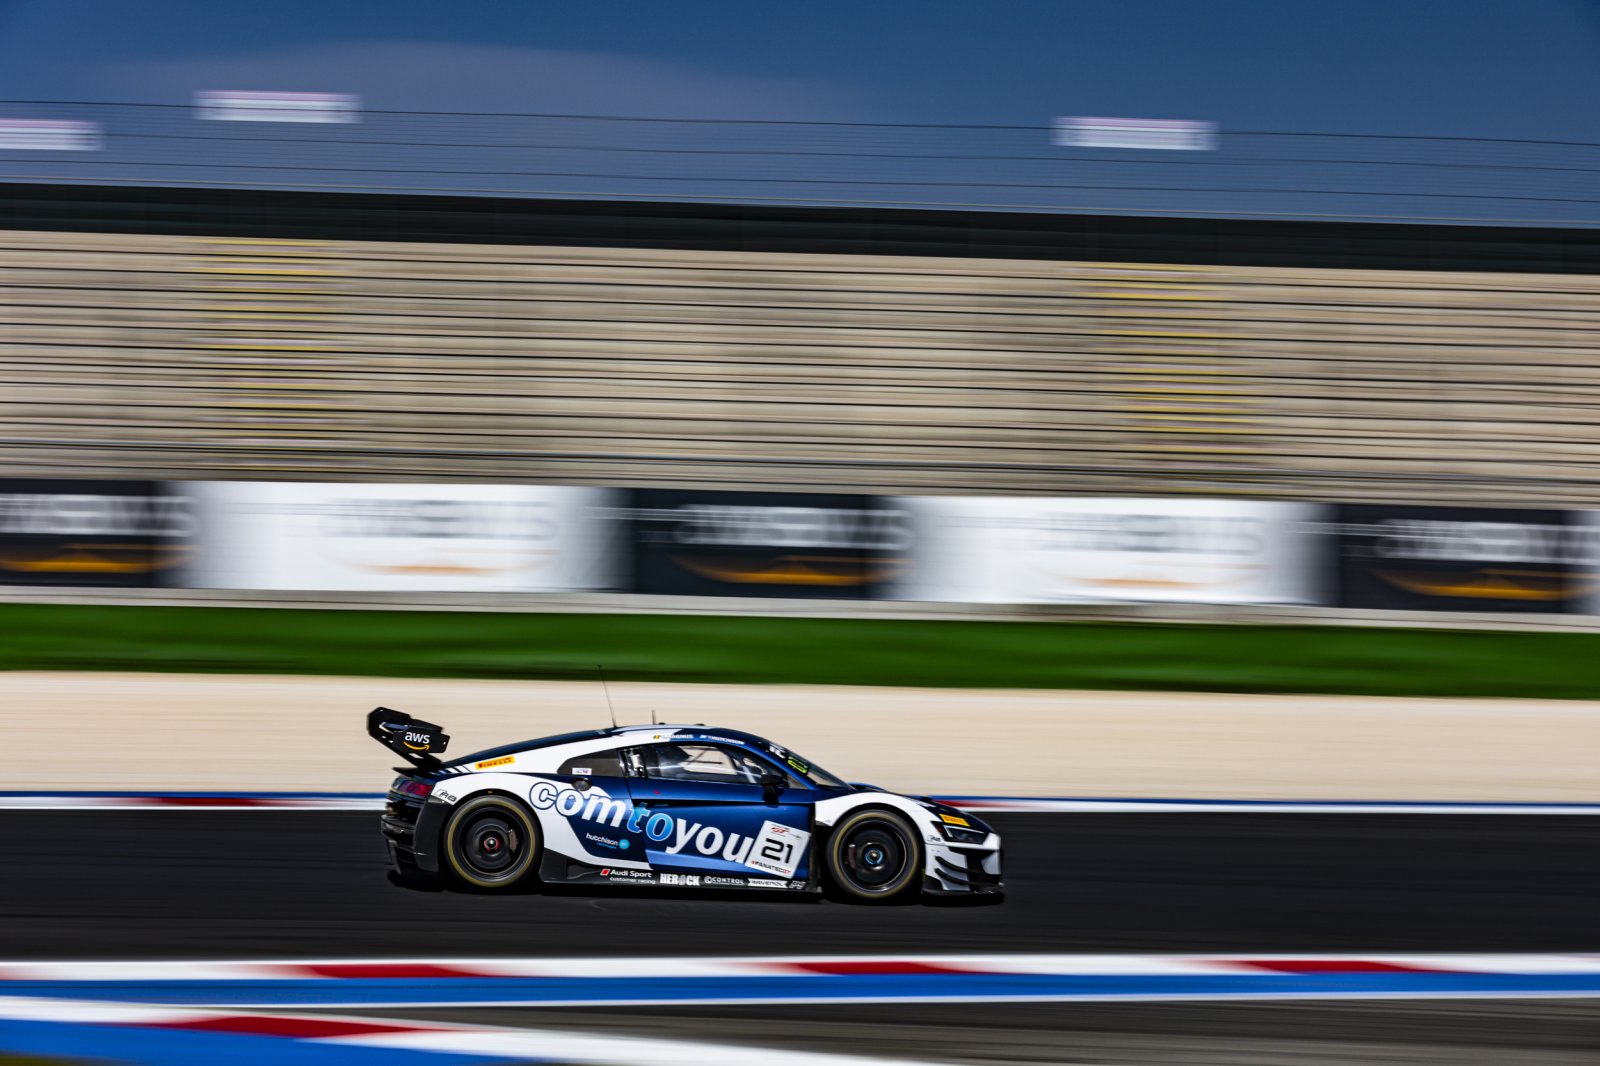 Comtoyou Racing completes Friday sweep as Audi runners dominate Pre-Qualifying